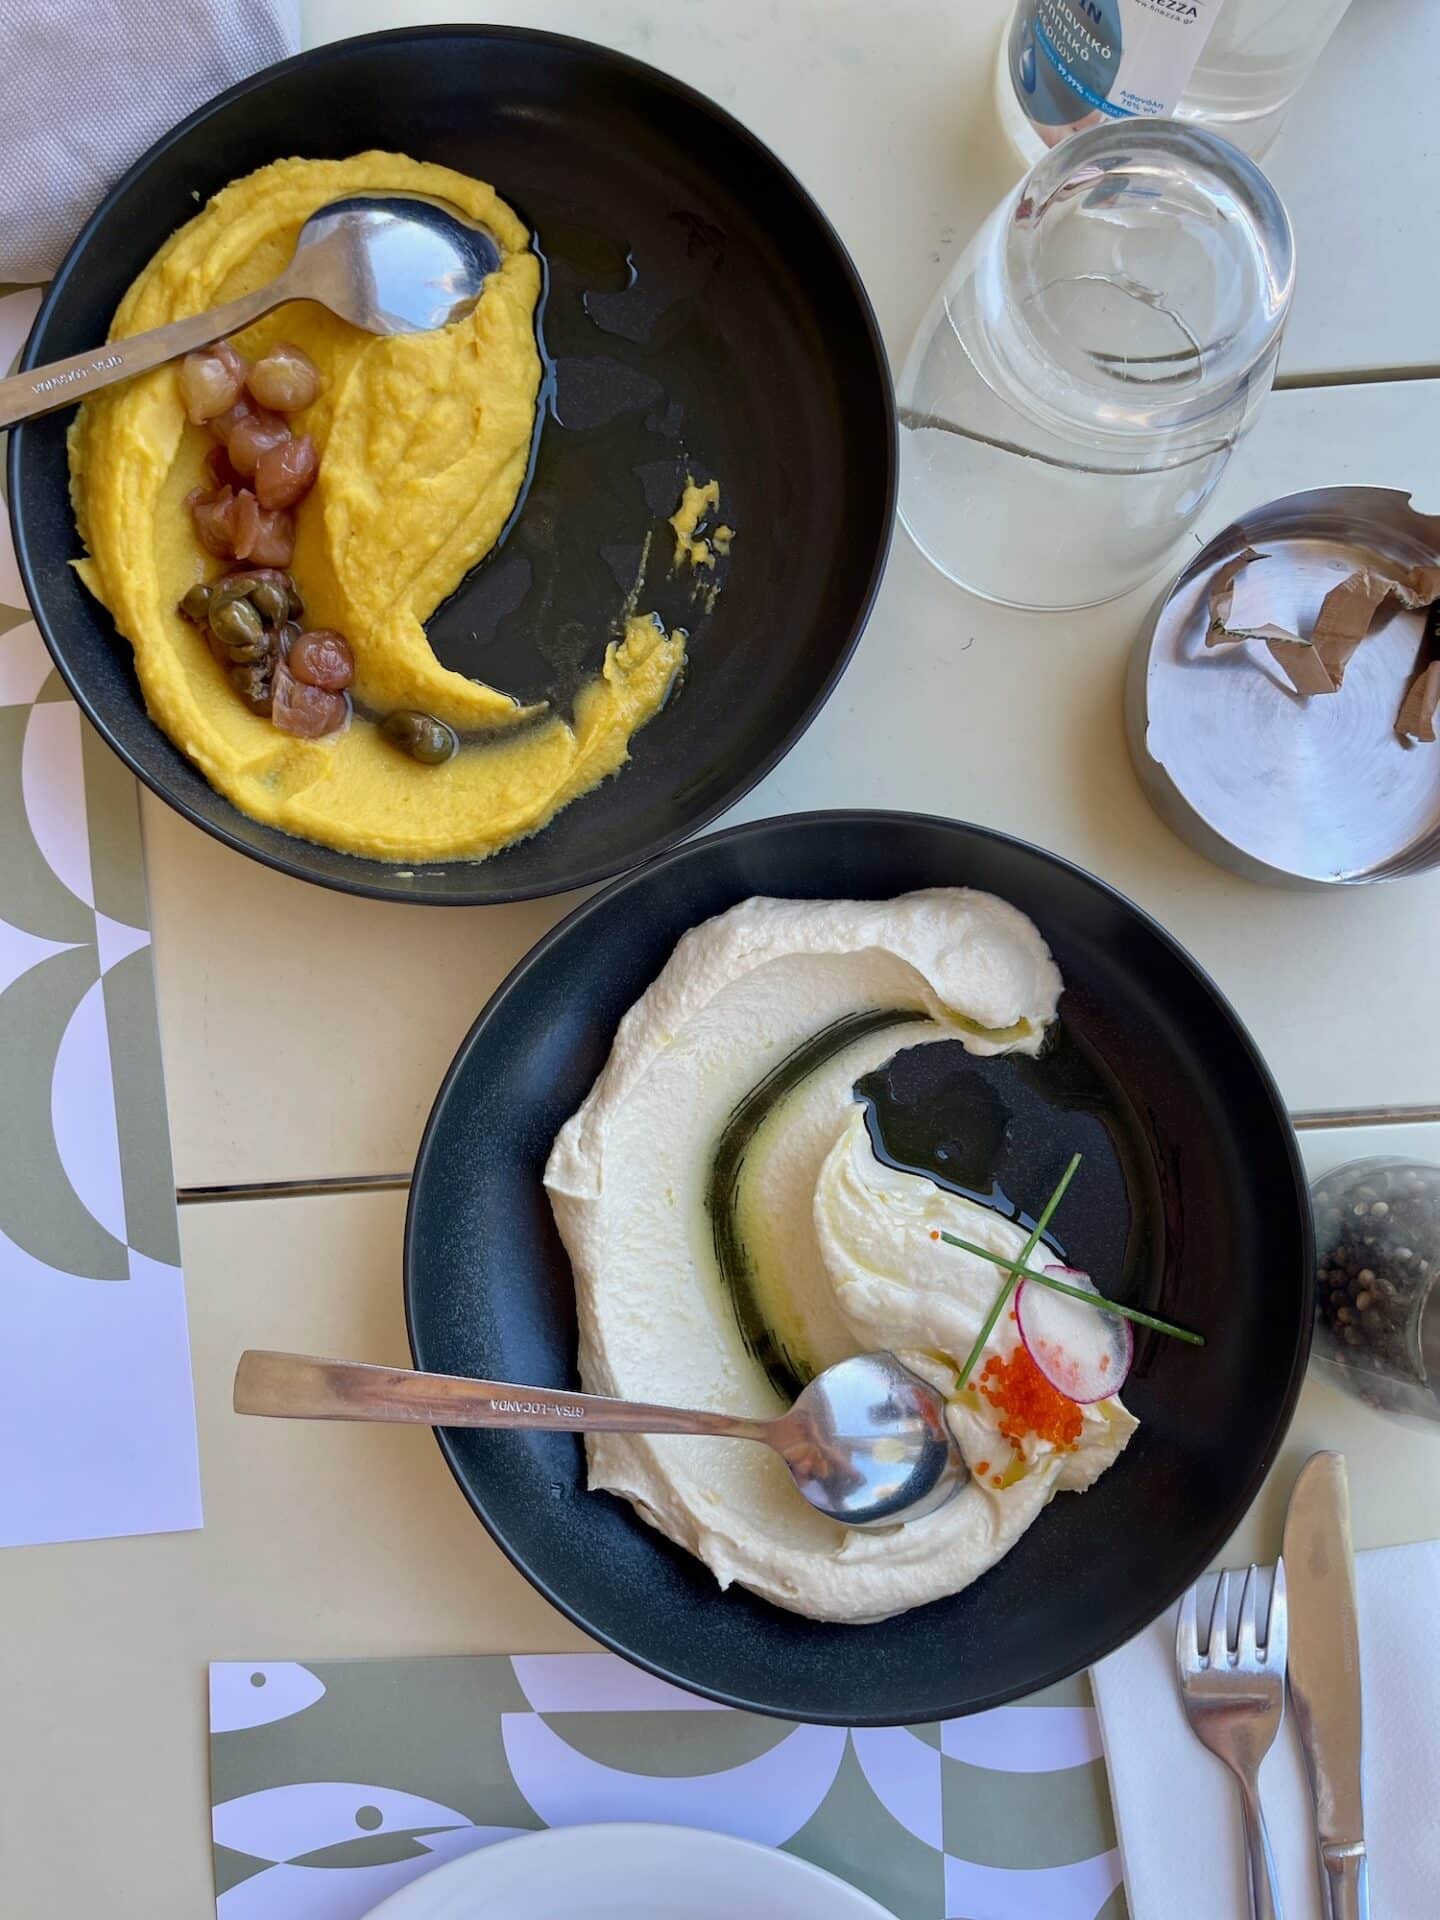 Overhead view of two bowls with creamy dips, one garnished with olives and the other with a drizzle of olive oil and a sprig, on a table with modern decor.